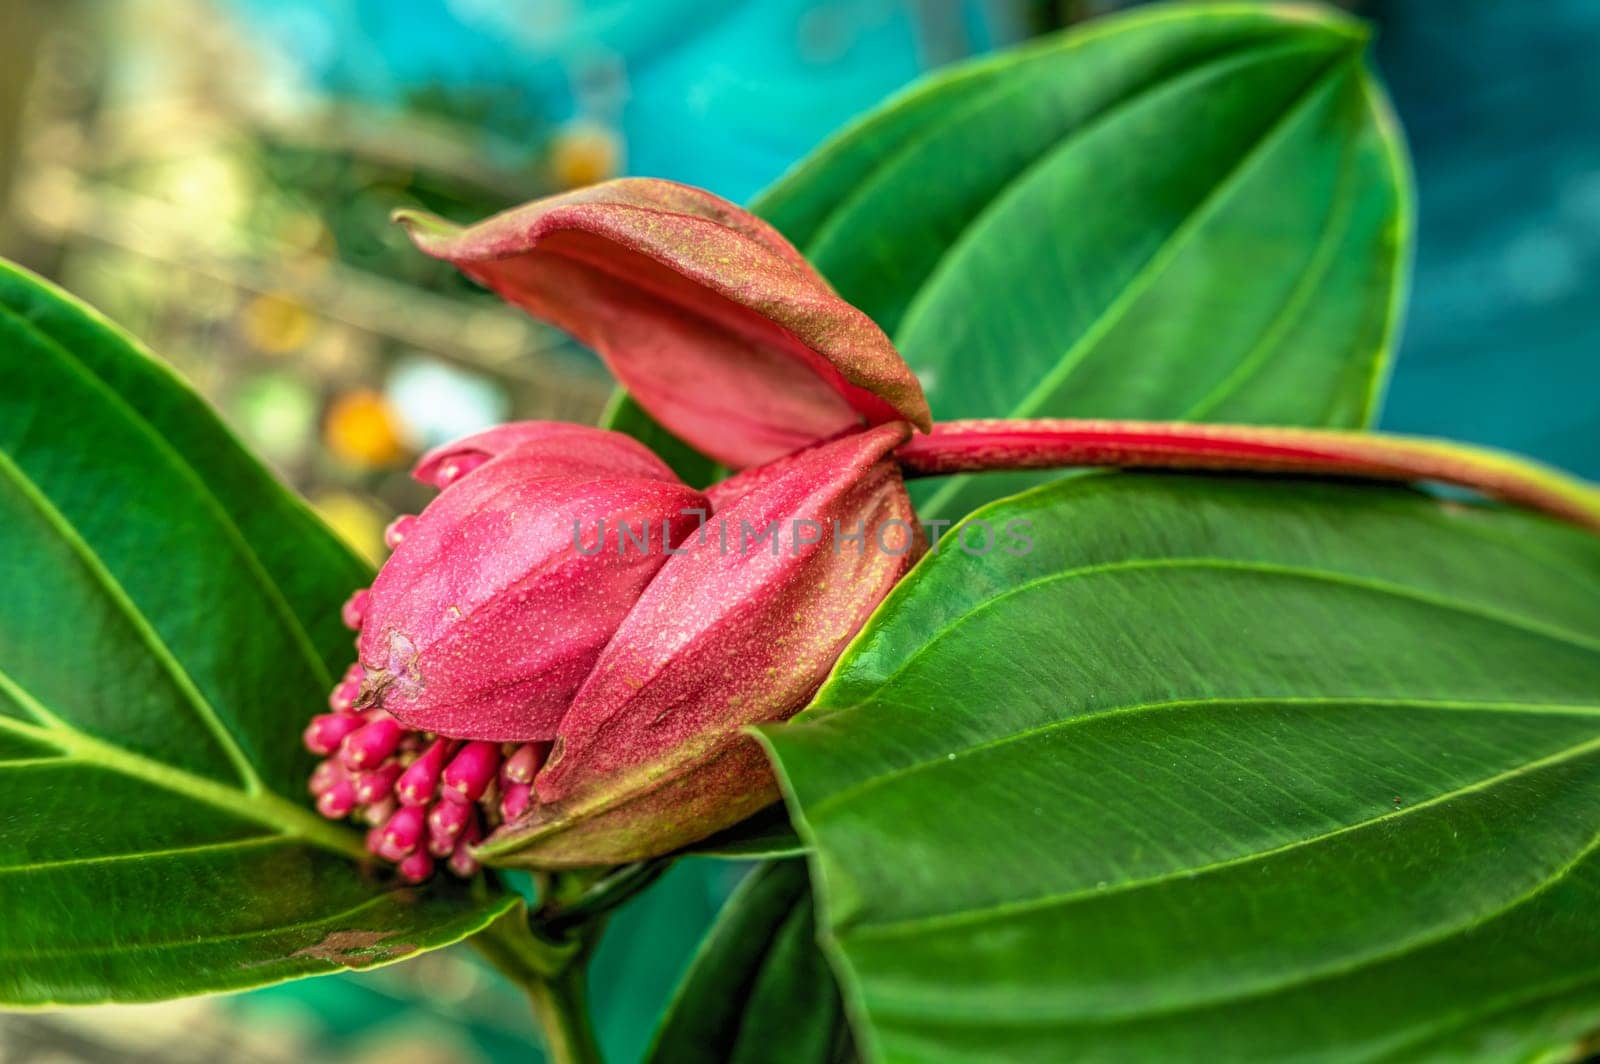 Red Medinilla flower against the background of green leaves on a sunny spring day